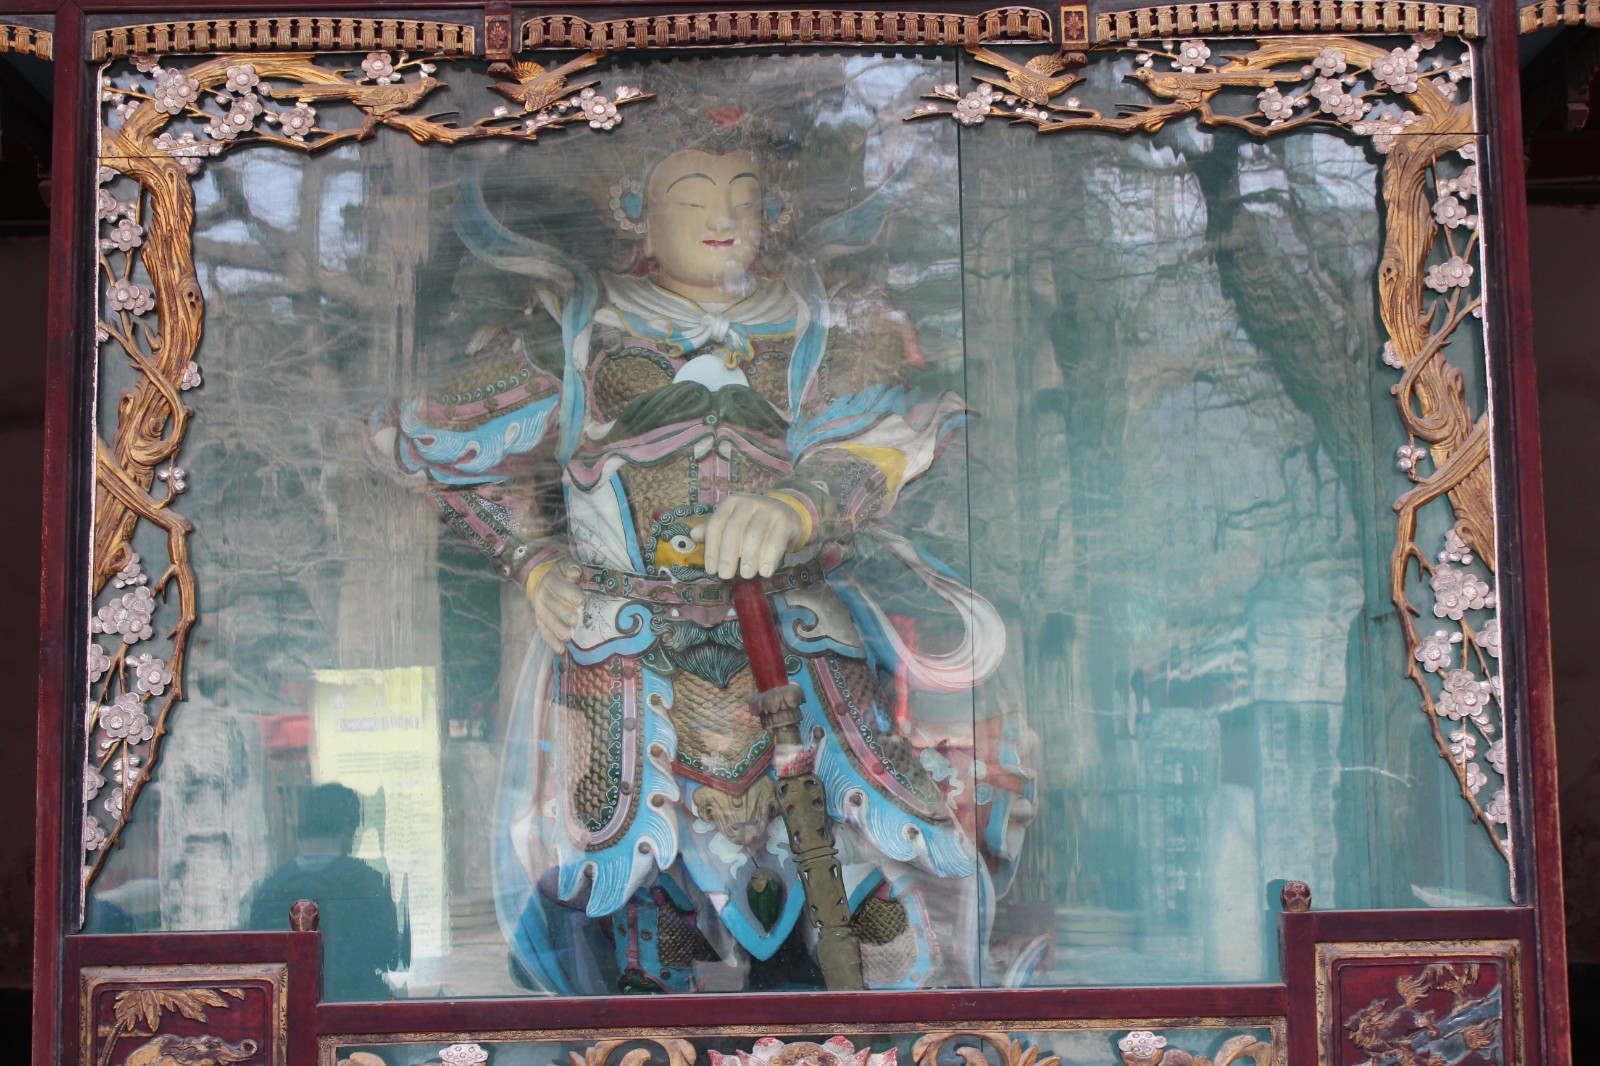 Weituo Bodhisattva at the Mountain Gate